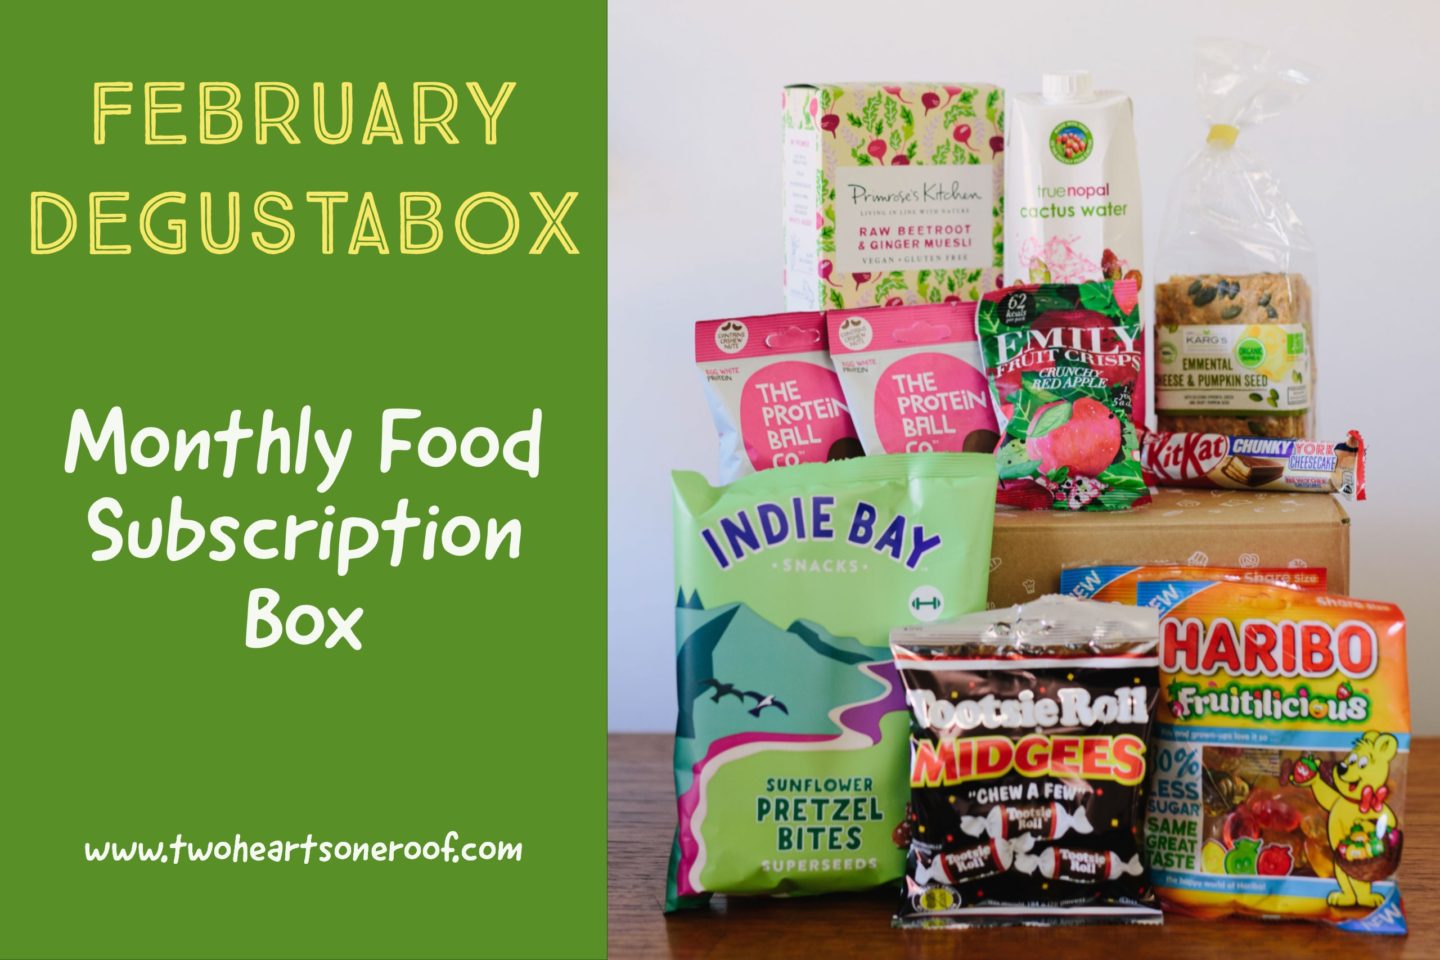 Review // UK Degustabox February 2018 – Review and Discount Code